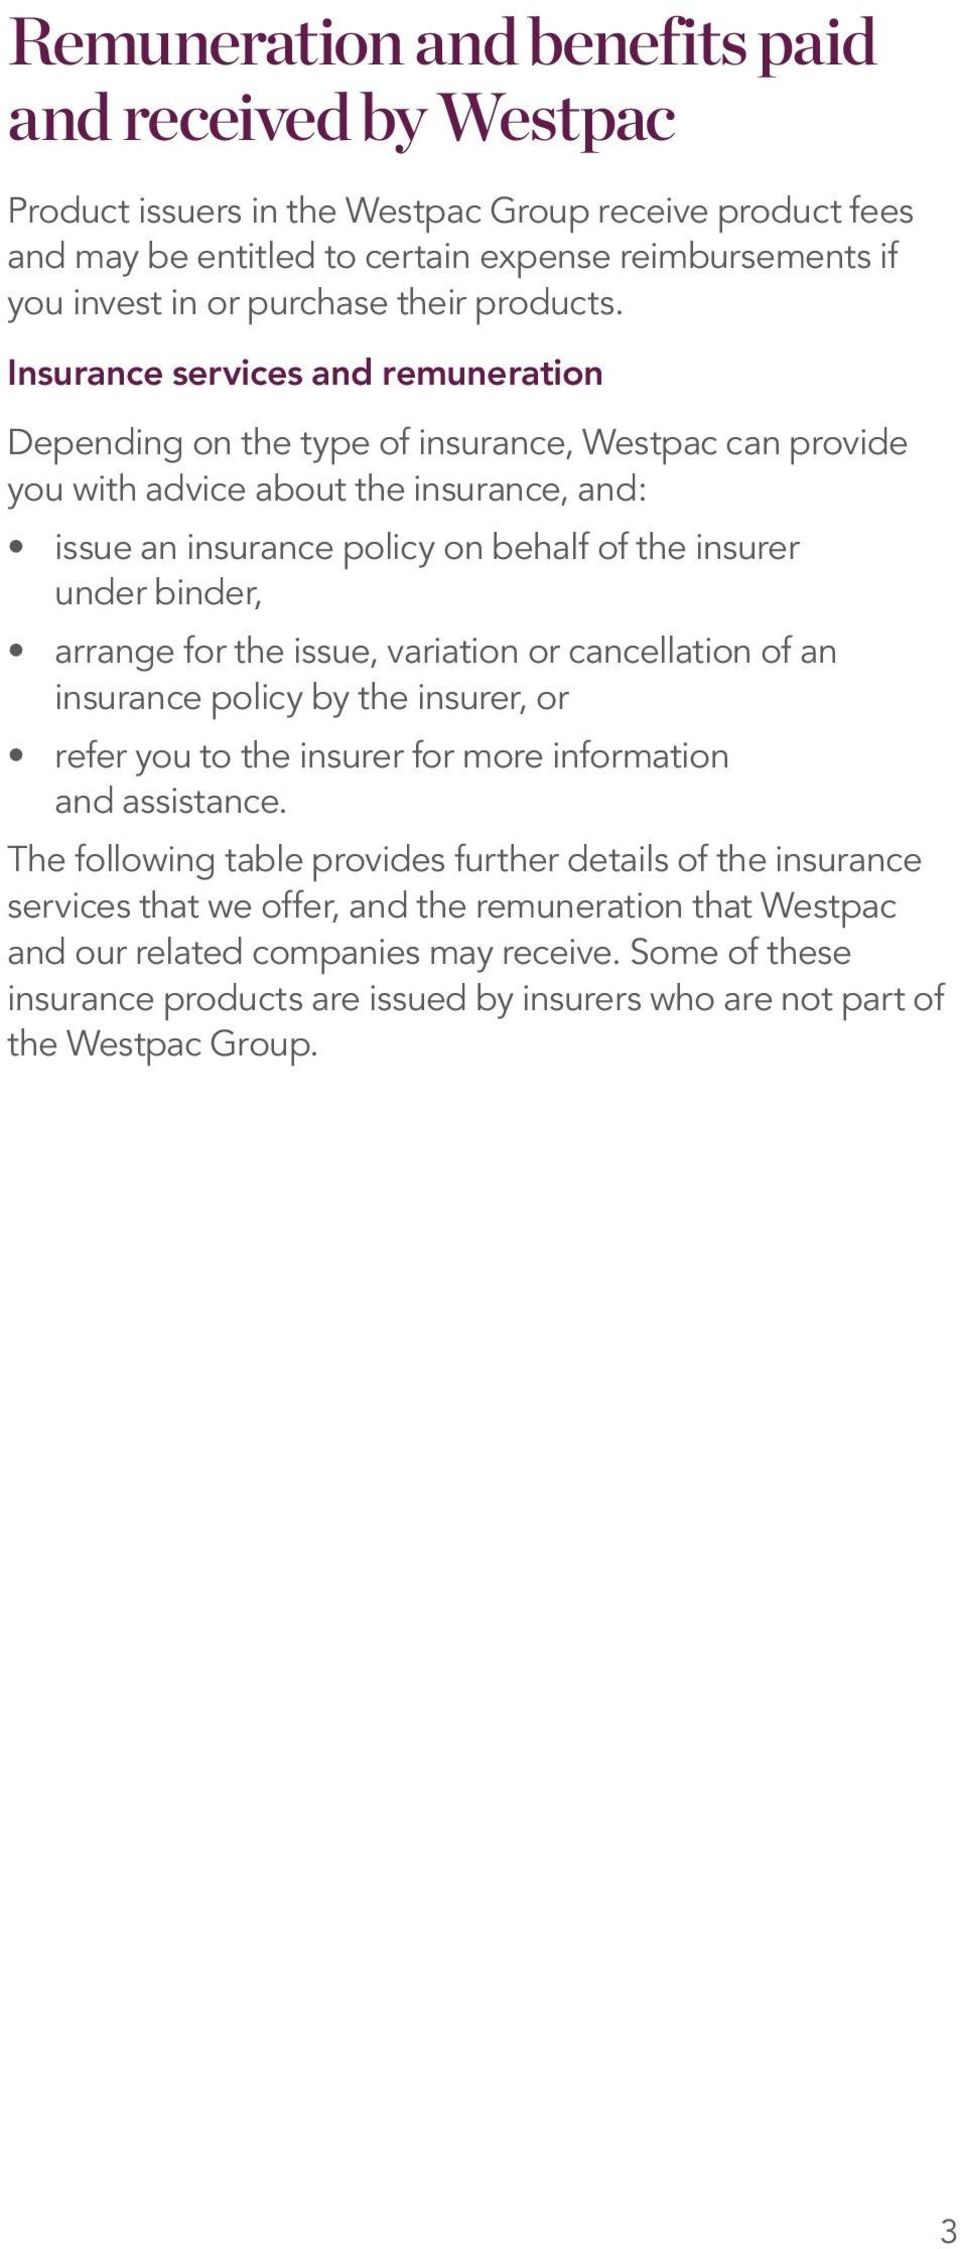 Insurance services and remuneration Depending on the type of insurance, Westpac can provide you with advice about the insurance, and: issue an insurance policy on behalf of the insurer under binder,